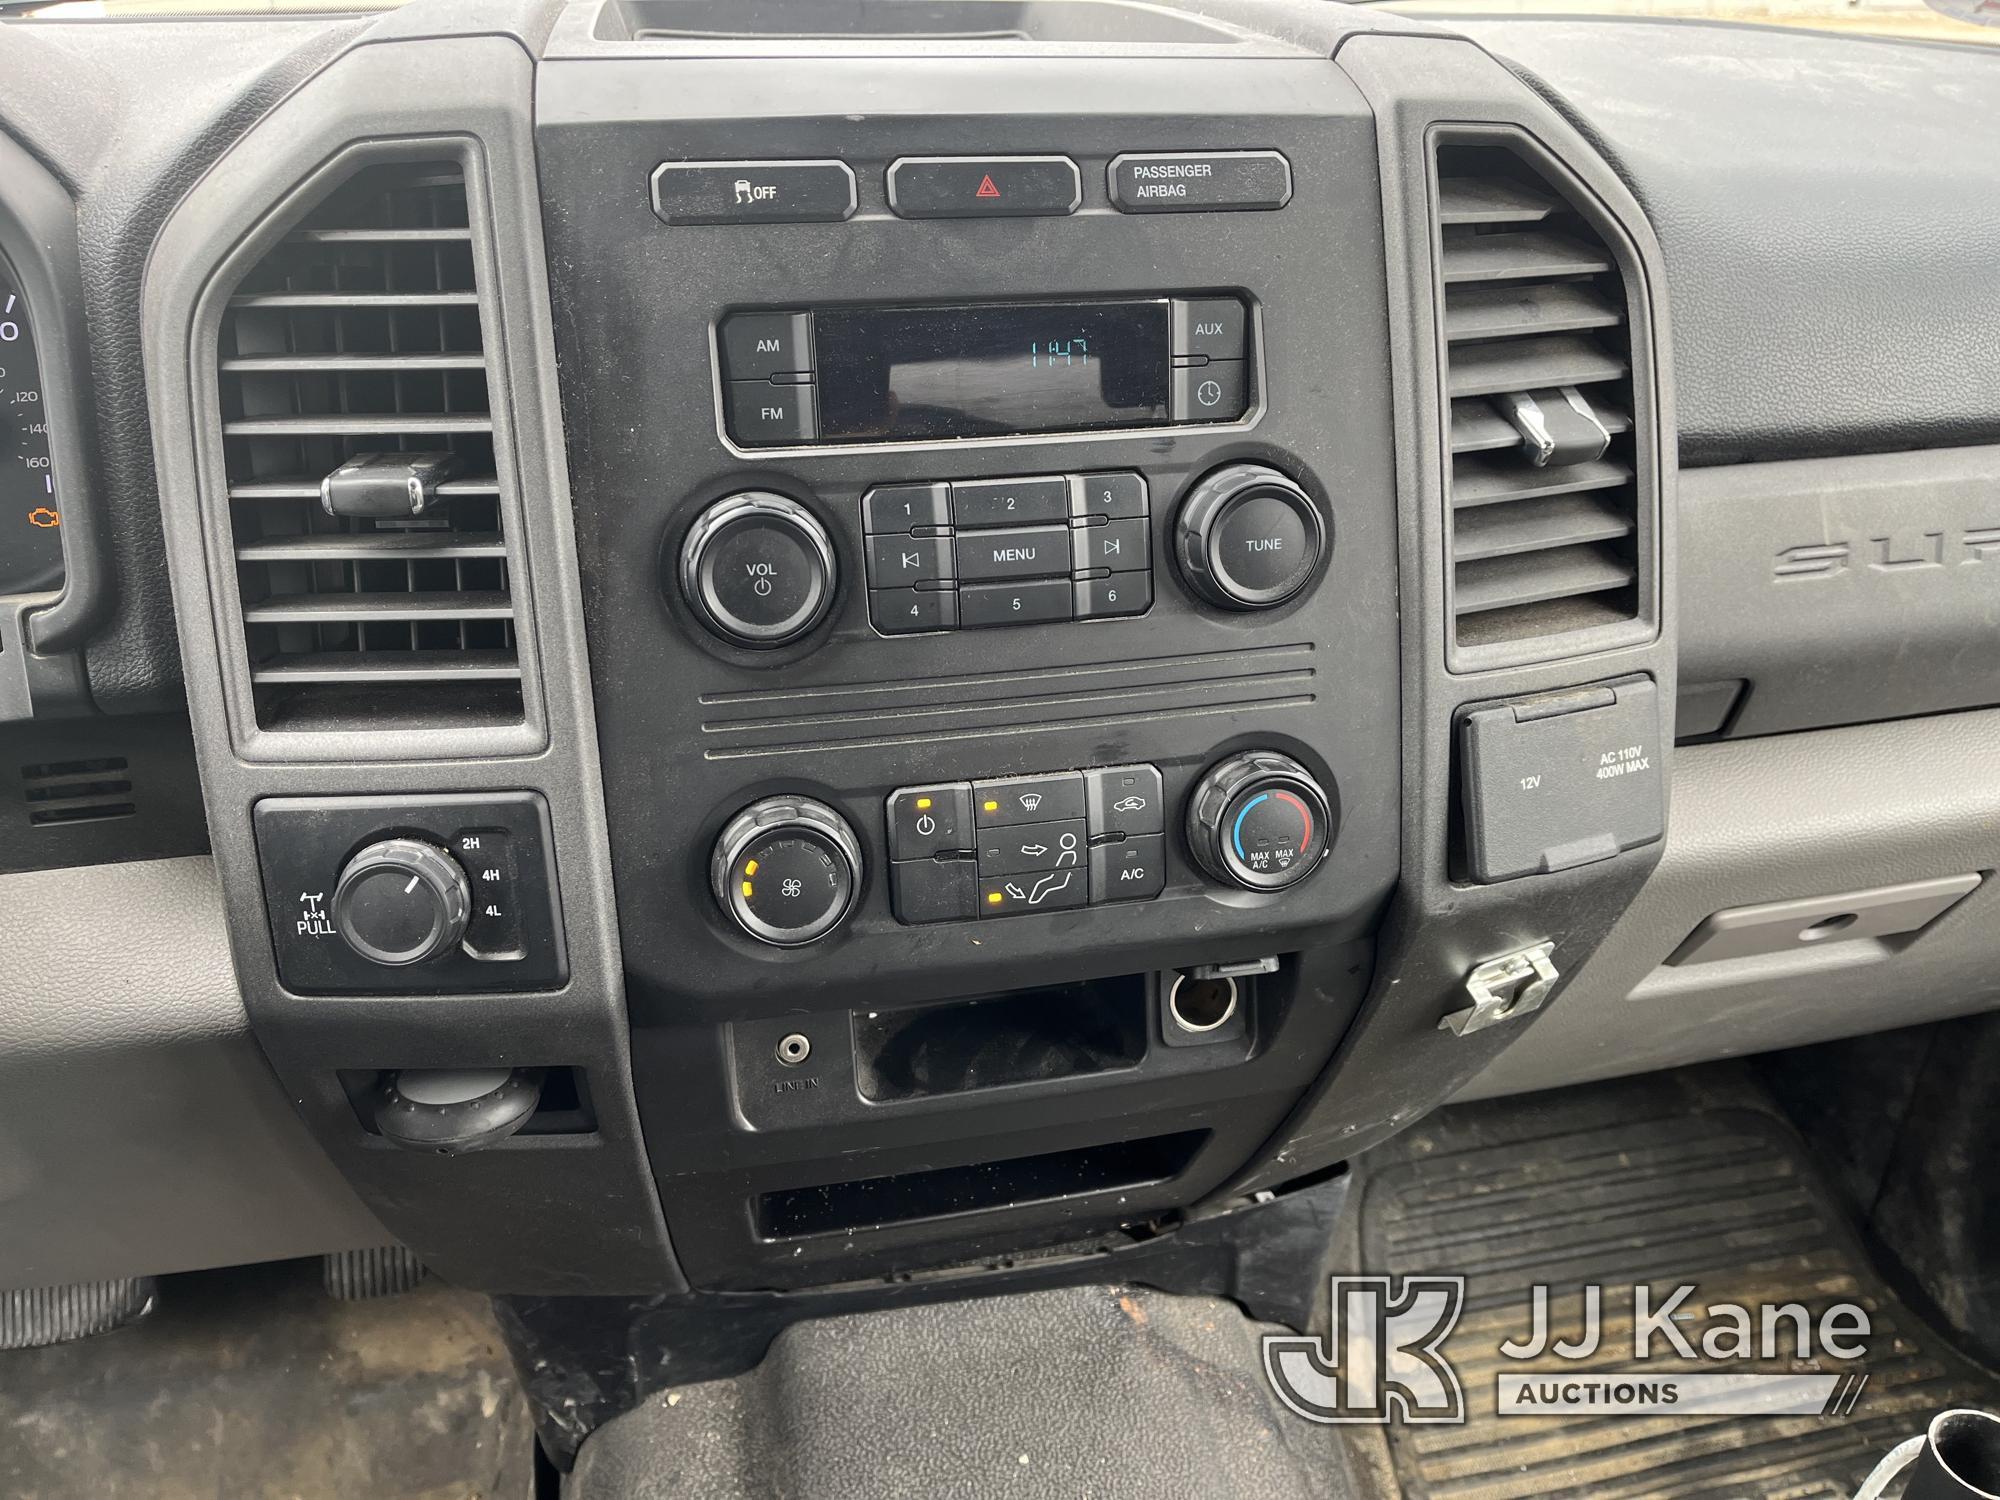 (Smock, PA) 2017 Ford F250 4x4 Extended-Cab Enclosed Service Truck Runs & Moves, Check Engine Light